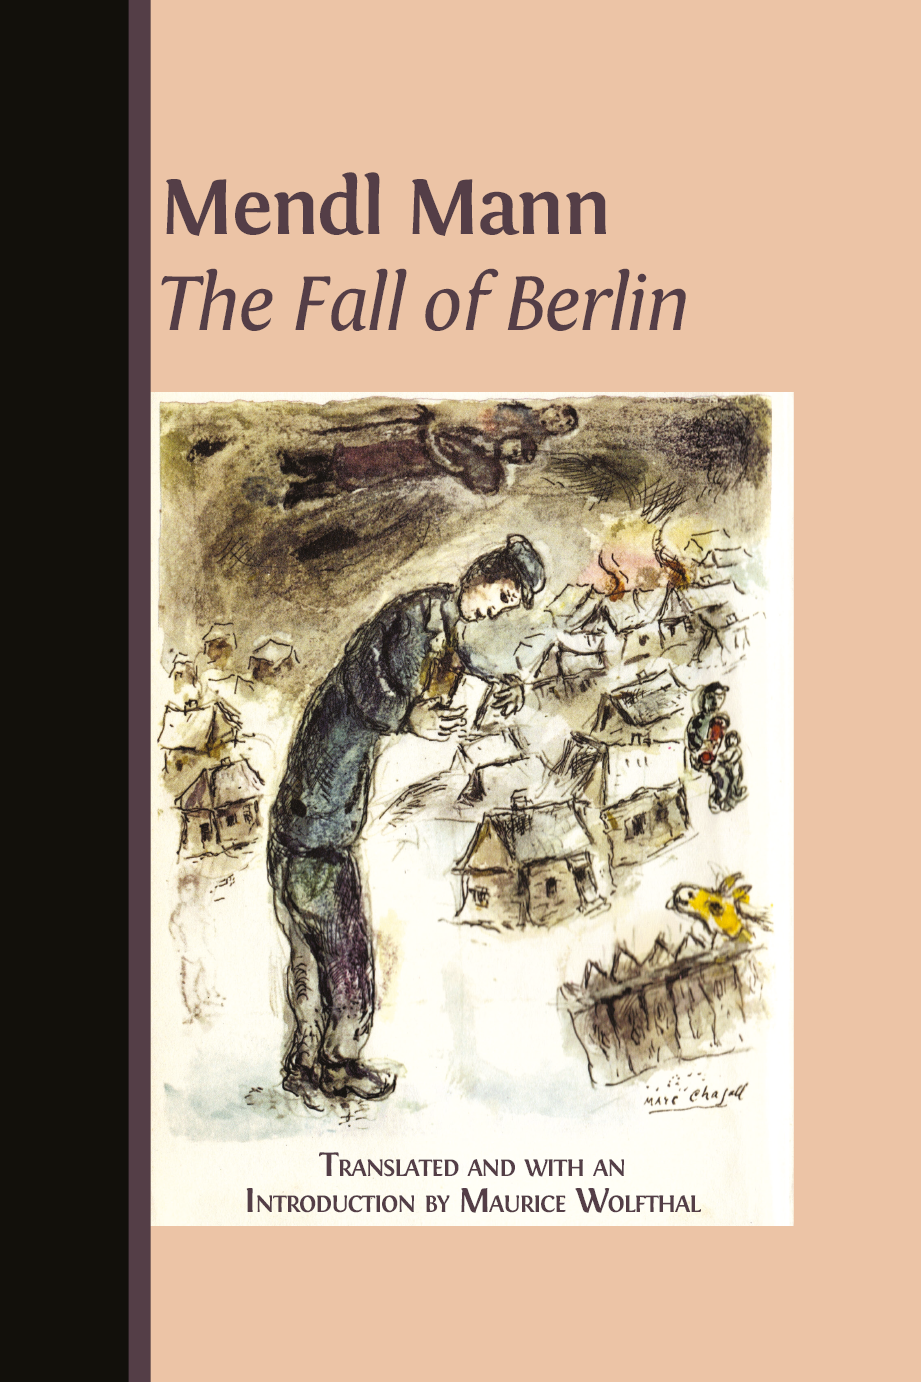 Mendl Mann’s 'The Fall of Berlin' book cover image